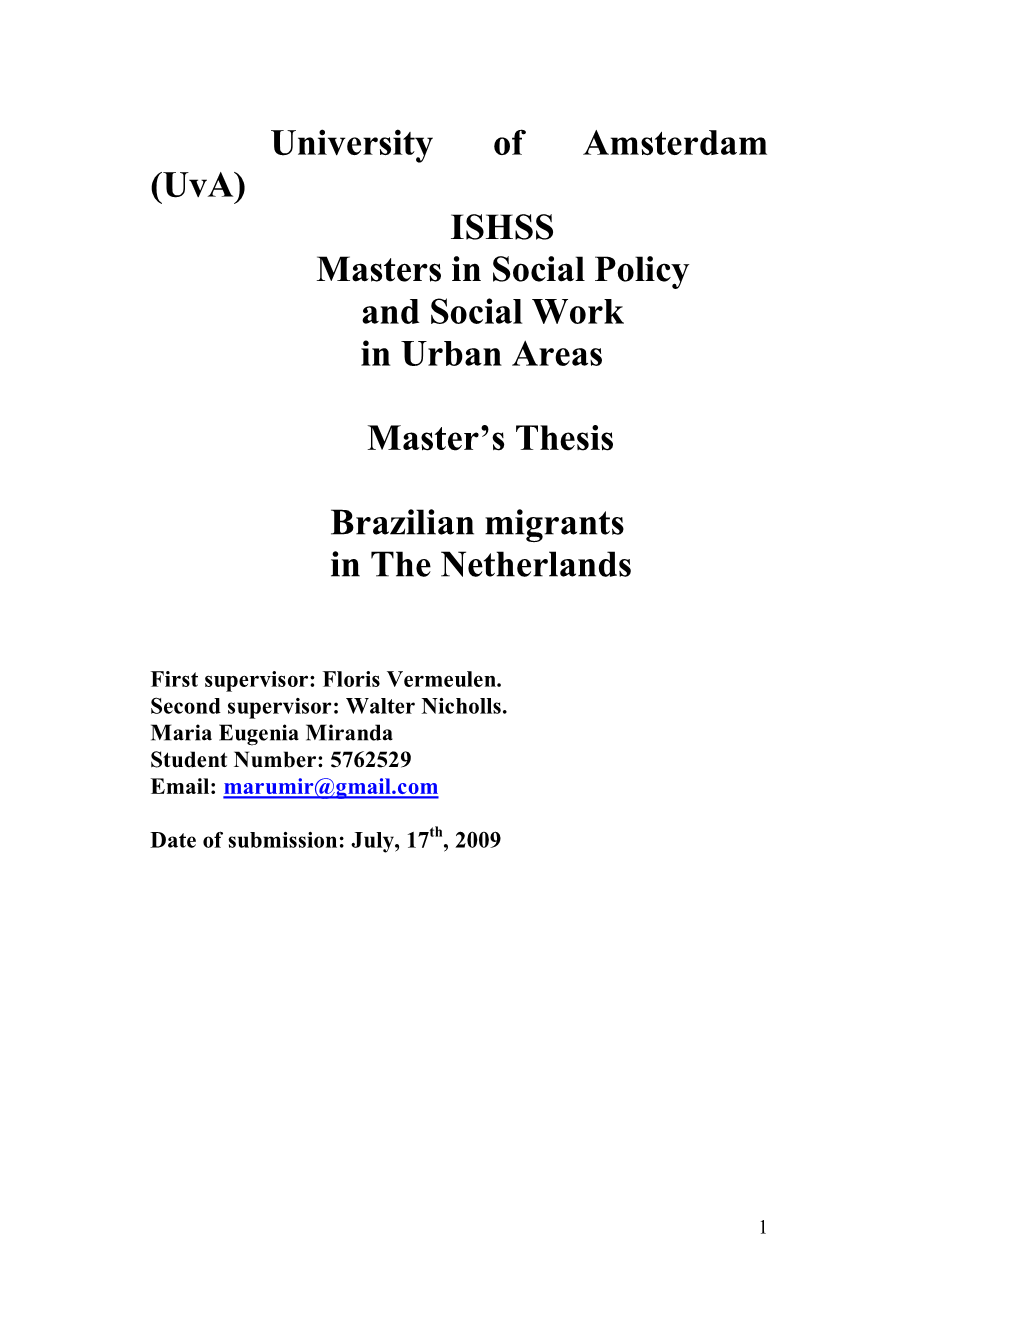 University of Amsterdam (Uva) ISHSS Masters in Social Policy and Social Work in Urban Areas